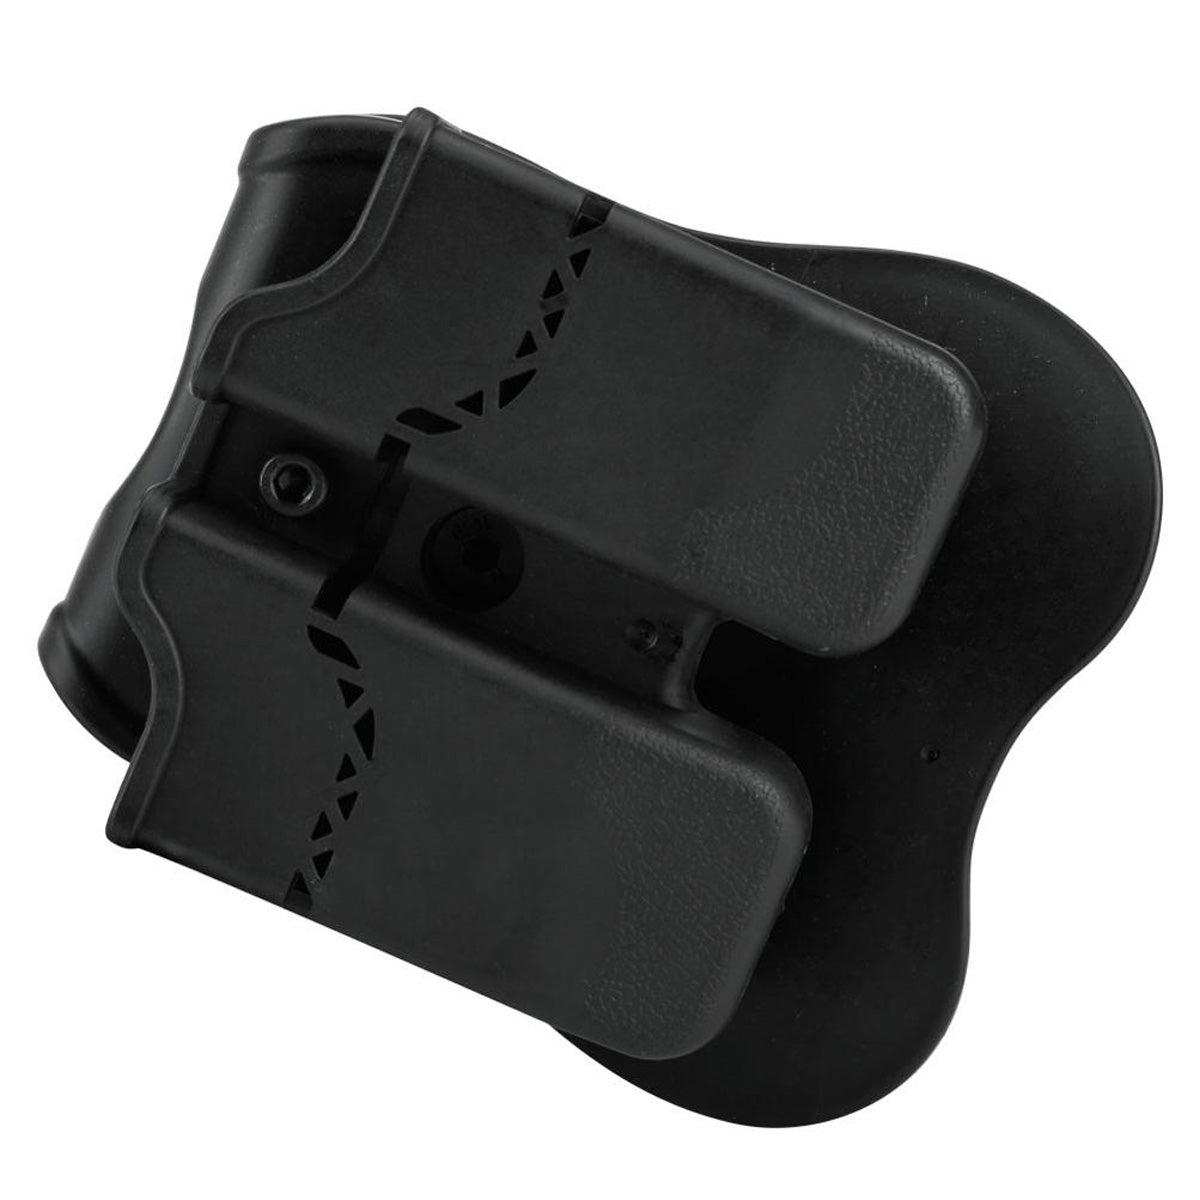 WOSPORT M92 SERIES AIRSOFT DOUBLE MAGAZINE POUCHES